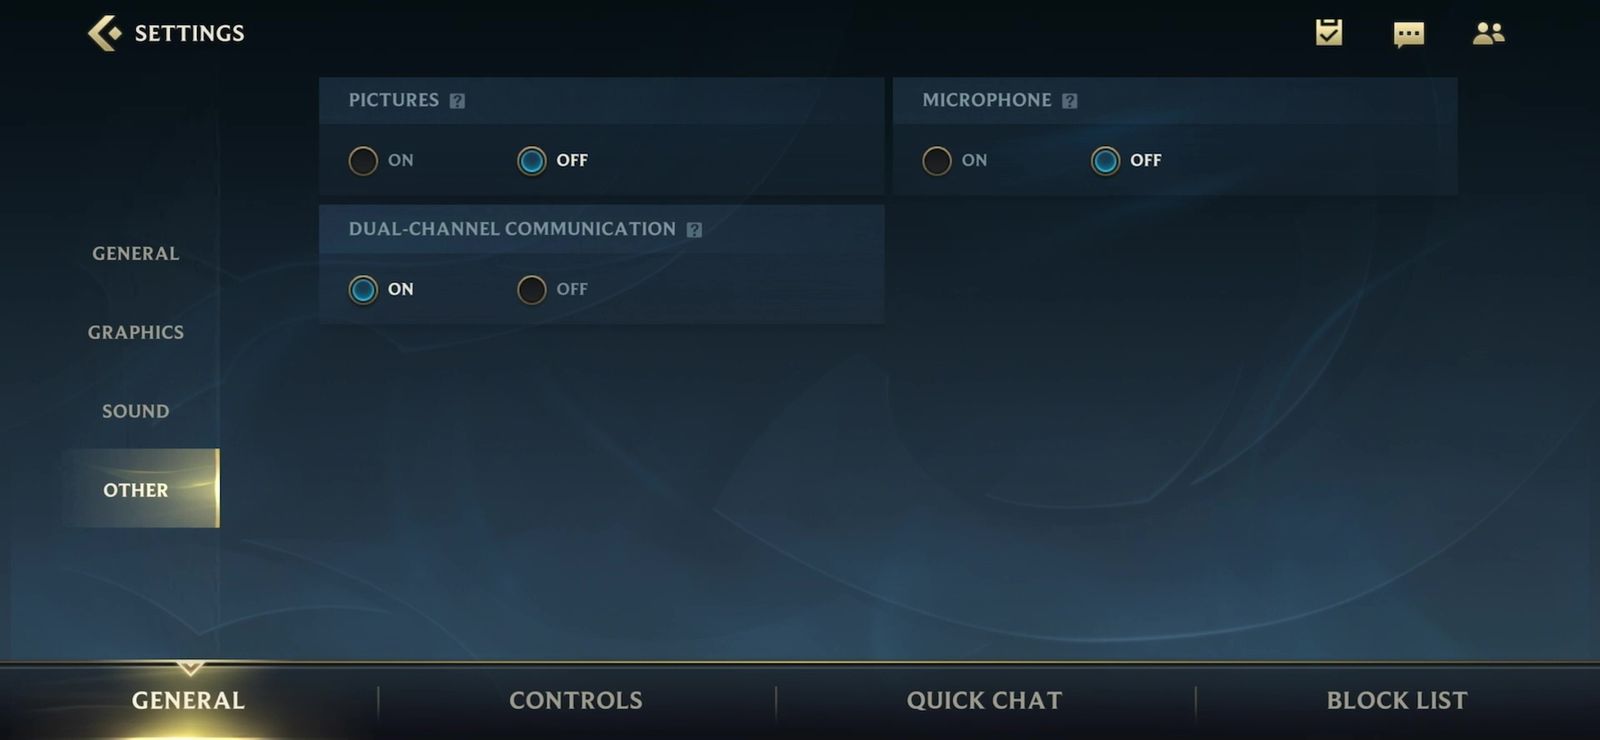 By going into the Settings menu and tapping Other, players can enable the Wild Rift dual-channel communication. 